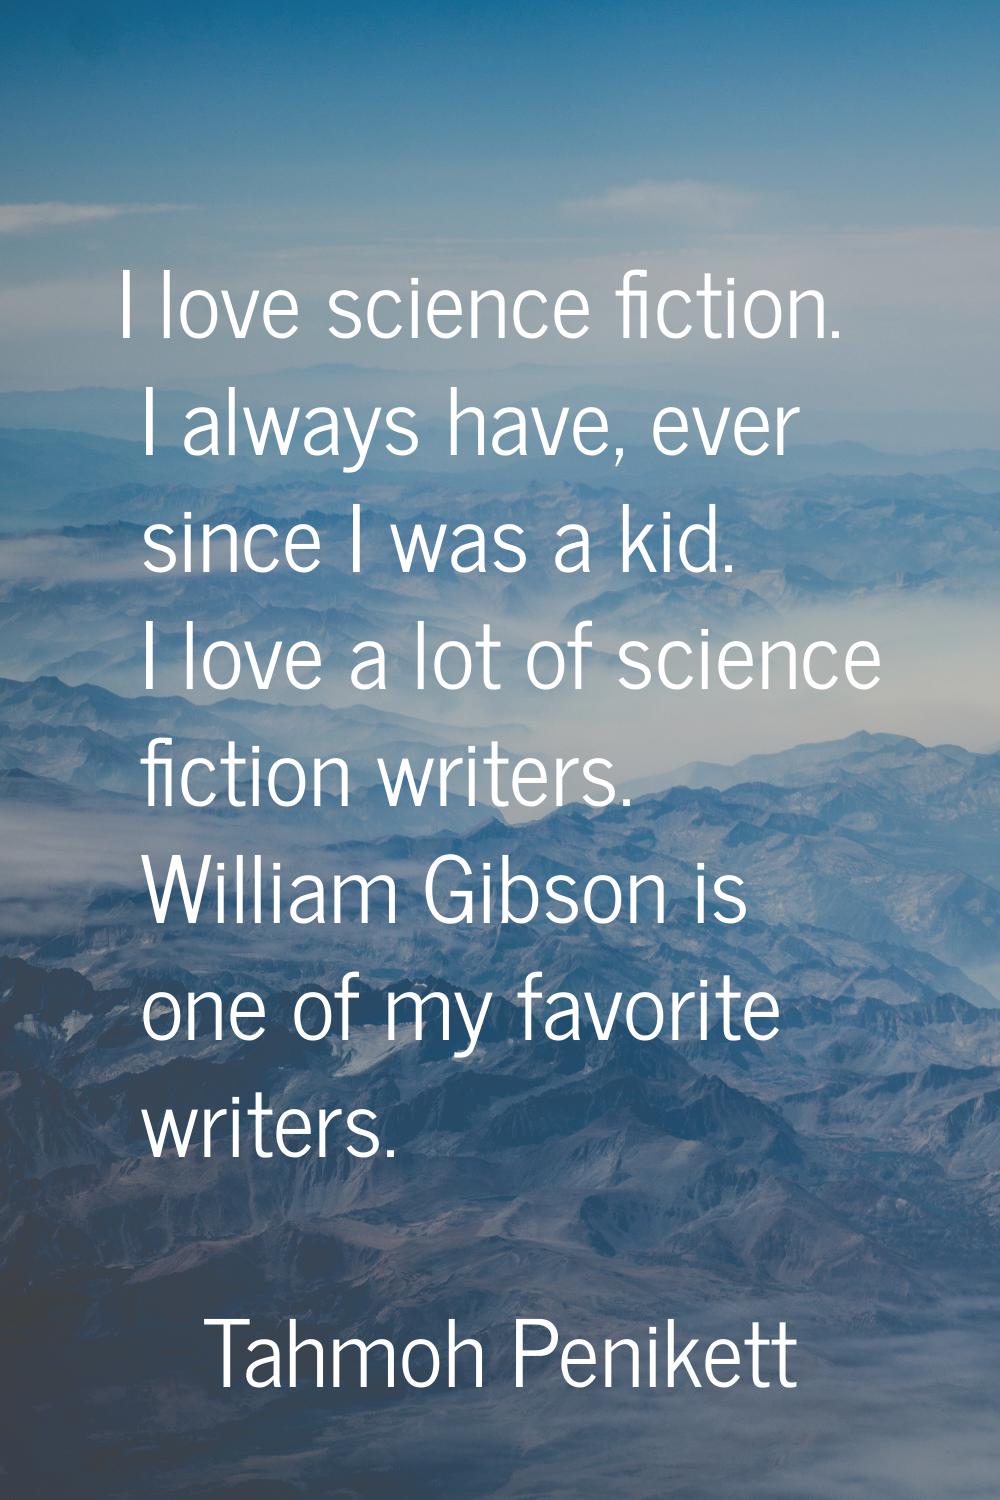 I love science fiction. I always have, ever since I was a kid. I love a lot of science fiction writ